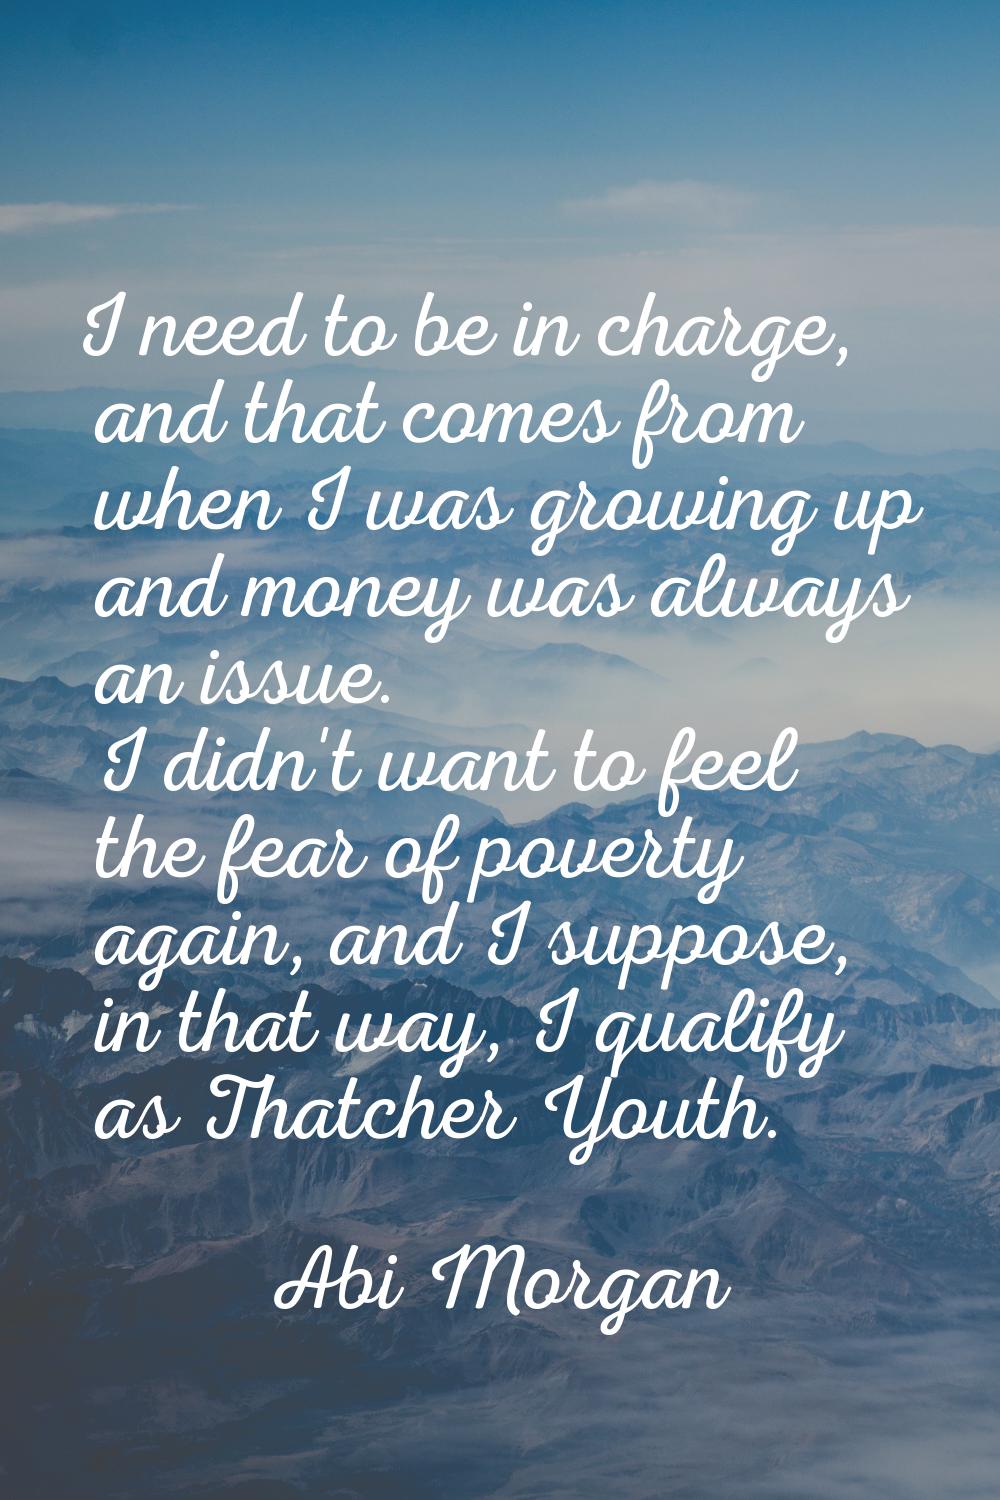 I need to be in charge, and that comes from when I was growing up and money was always an issue. I 